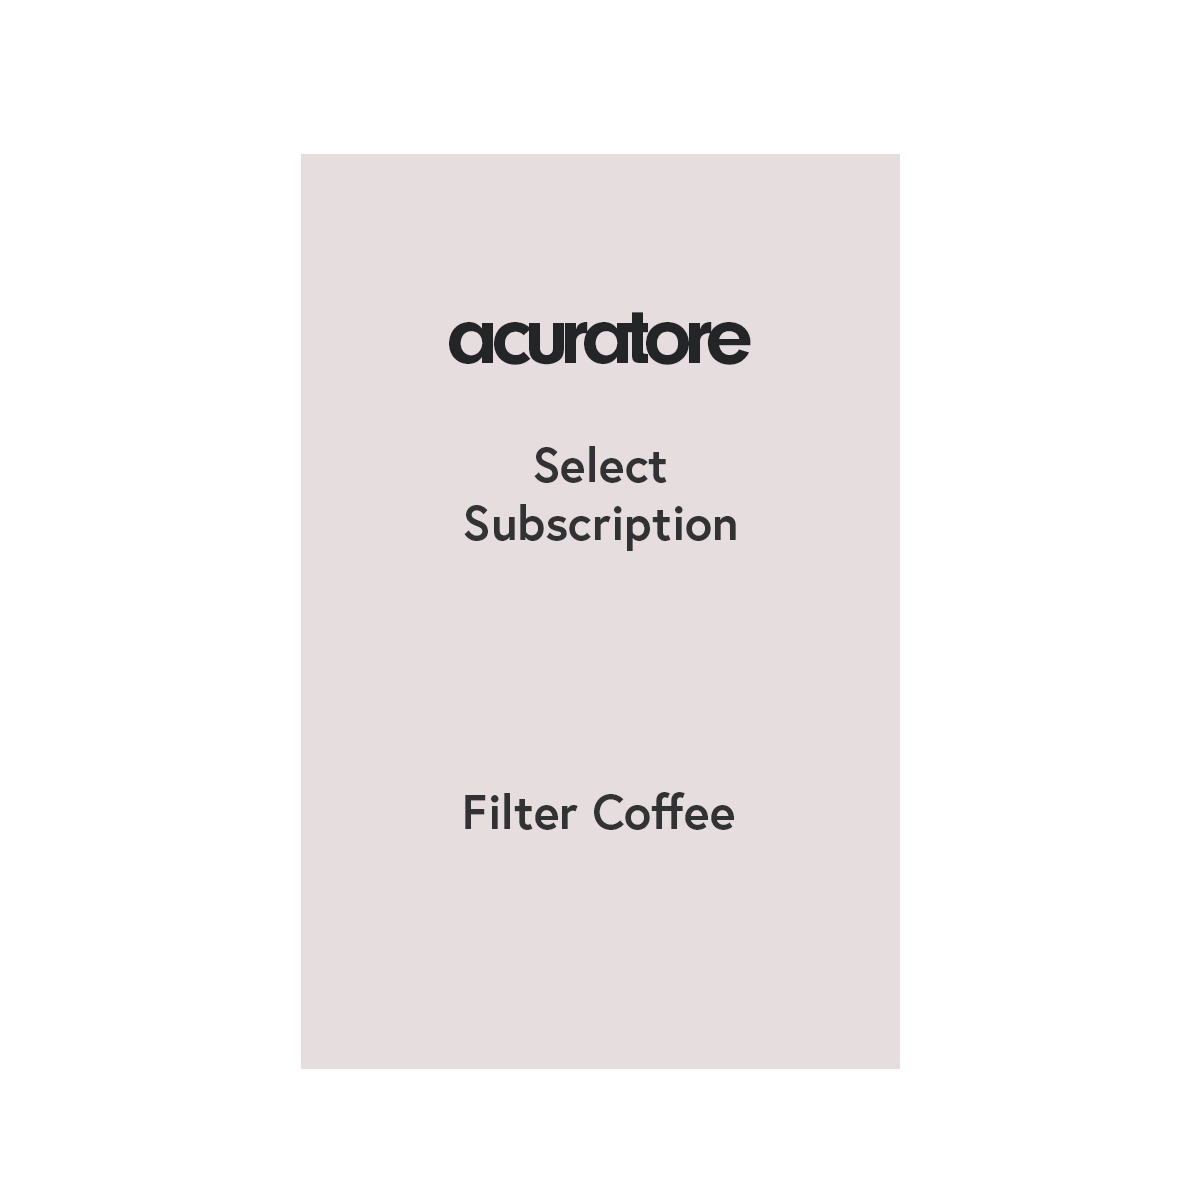 Acuratore Select Subscription for Filter style coffee